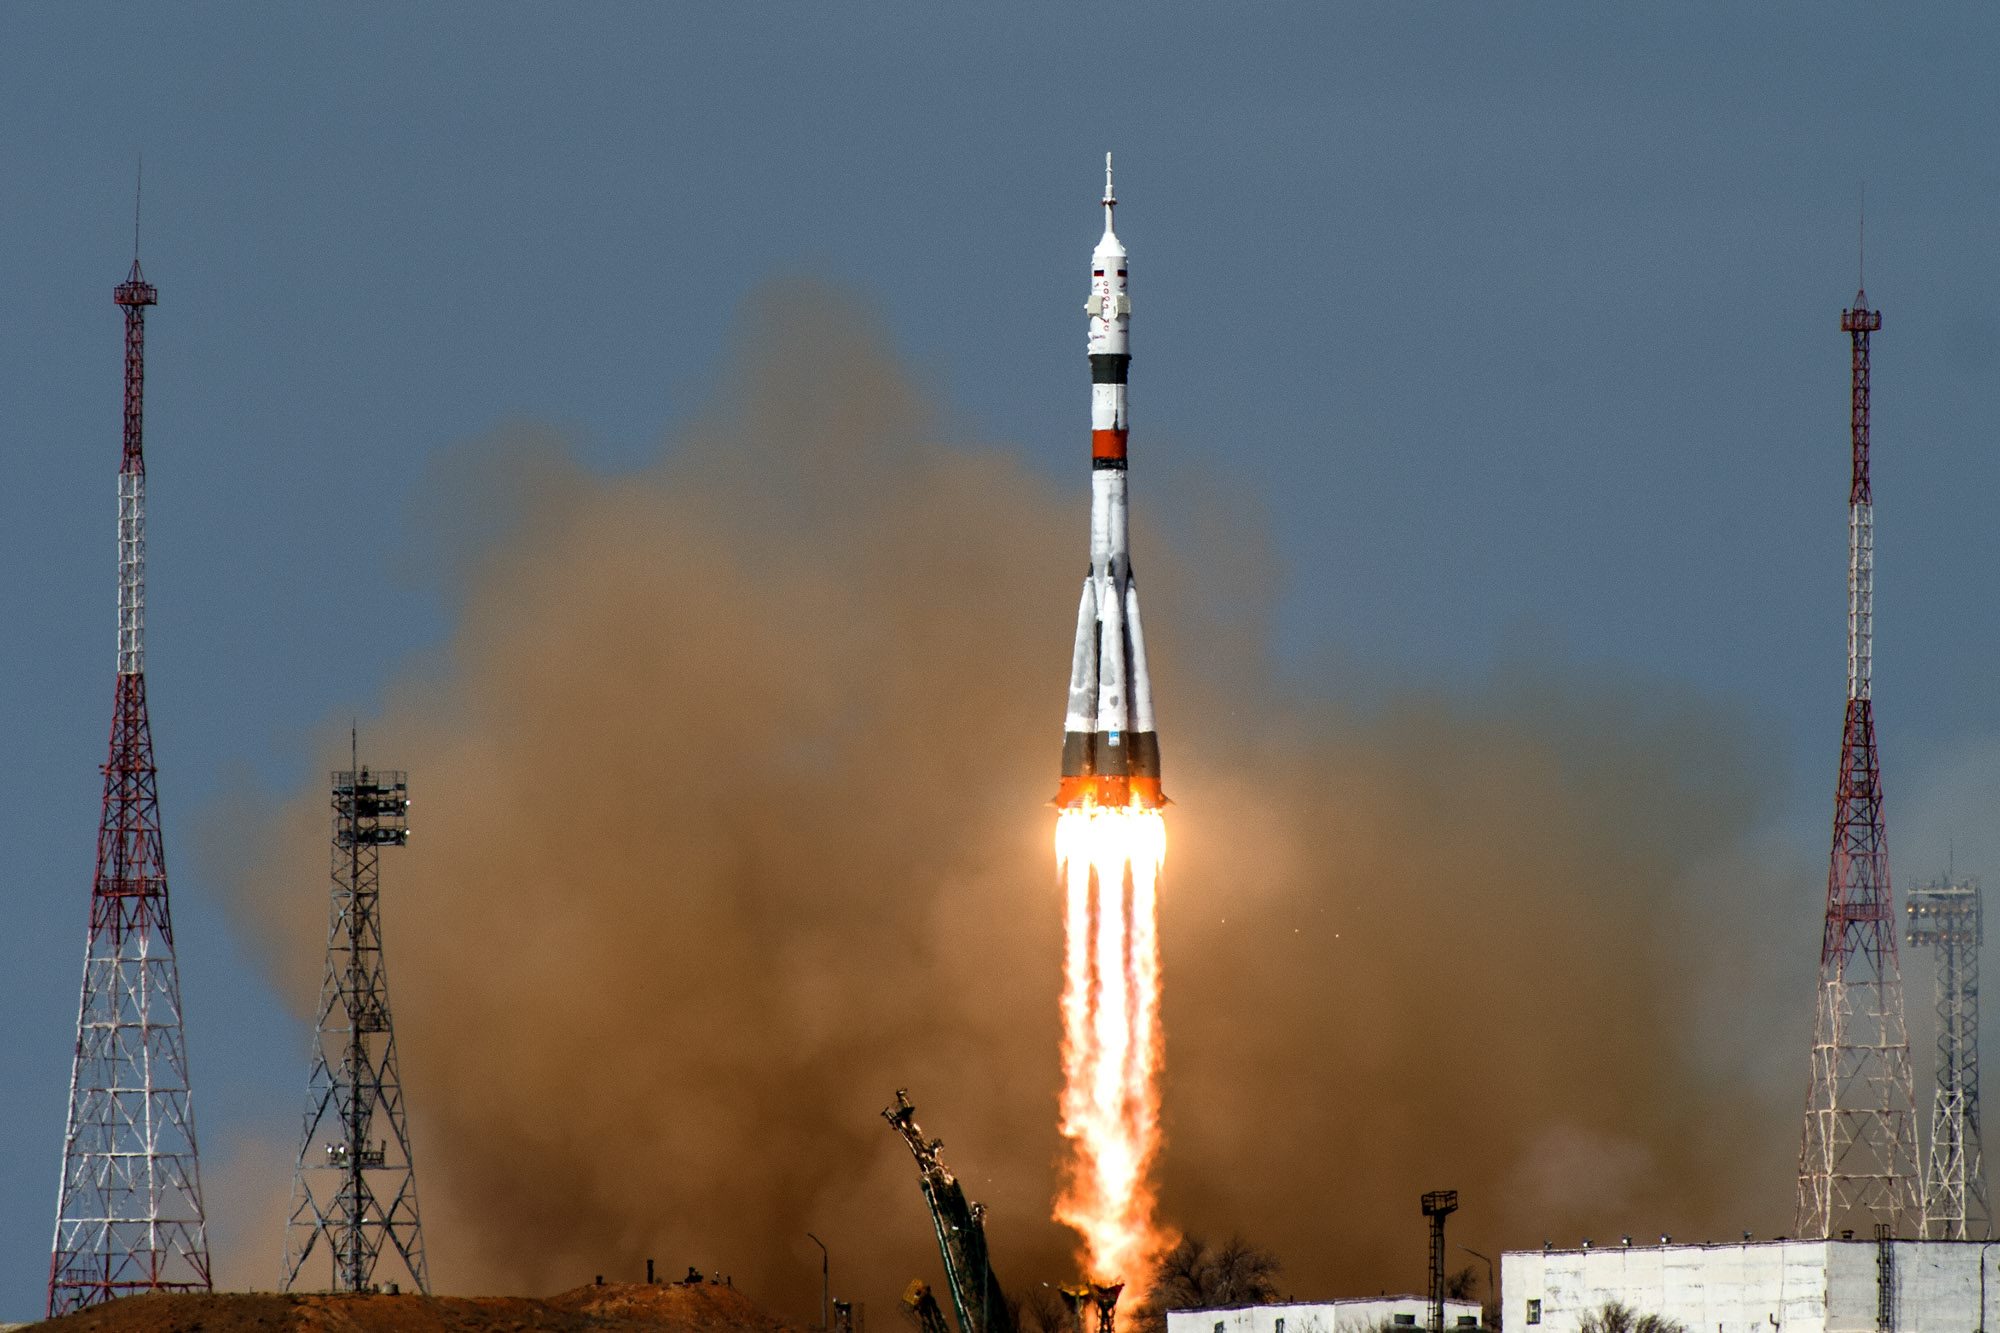 TOPSHOT - This Russia's space agency Roscosmos handout picture taken and released on April 9, 2020 shows the Soyuz MS-16 spacecraft carrying the members of the International Space Station (ISS) expedition 63, NASA astronaut Chris Cassidy and Russian cosmonauts Anatoly Ivanishin and Ivan Vagner, blasting off to the ISS from the launch pad at the Russian-leased Baikonur cosmodrome in Kazakhstan. (Photo by Andrey SHELEPIN / Russian Space Agency Roscosmos / AFP) / RESTRICTED TO EDITORIAL USE - MANDATORY CREDIT 